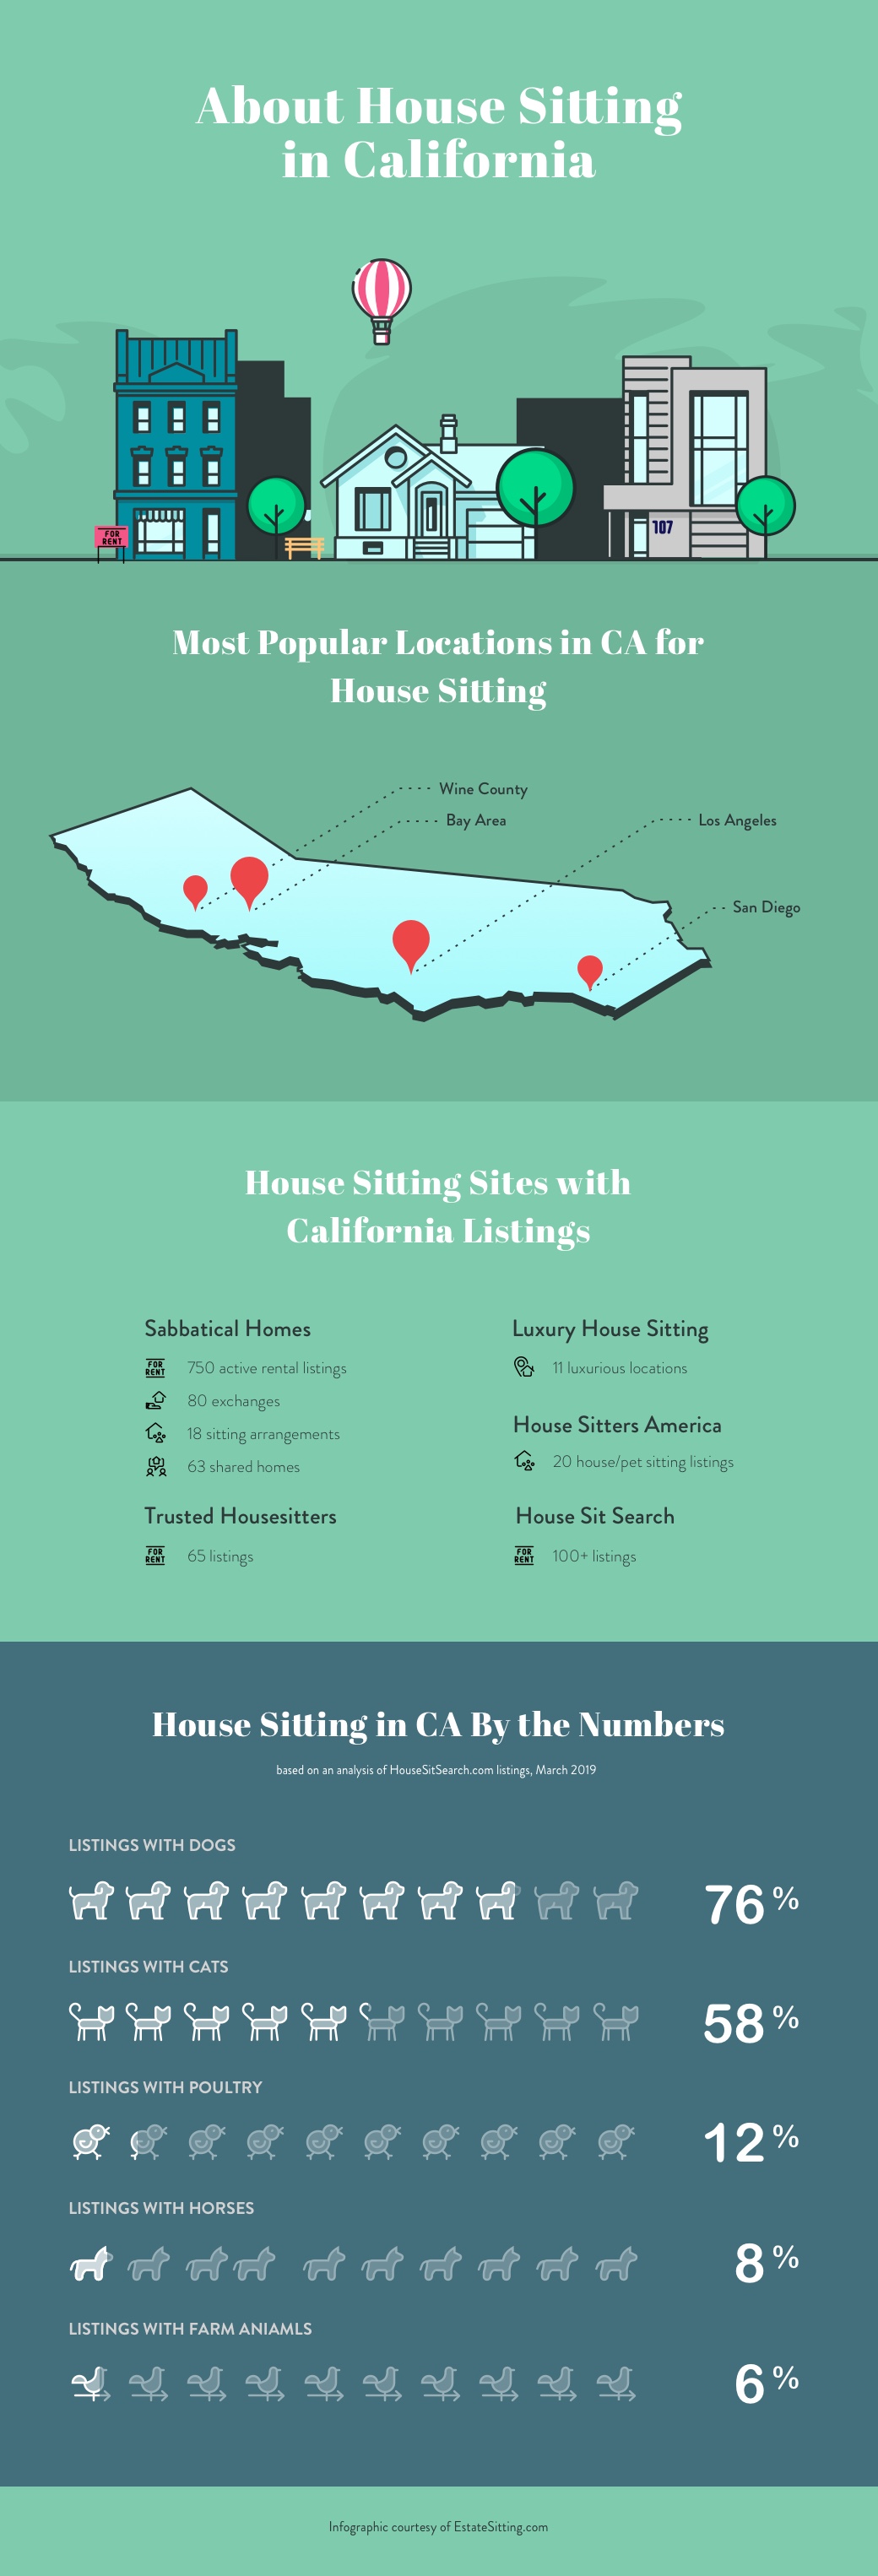 House Sitting in California Infographic